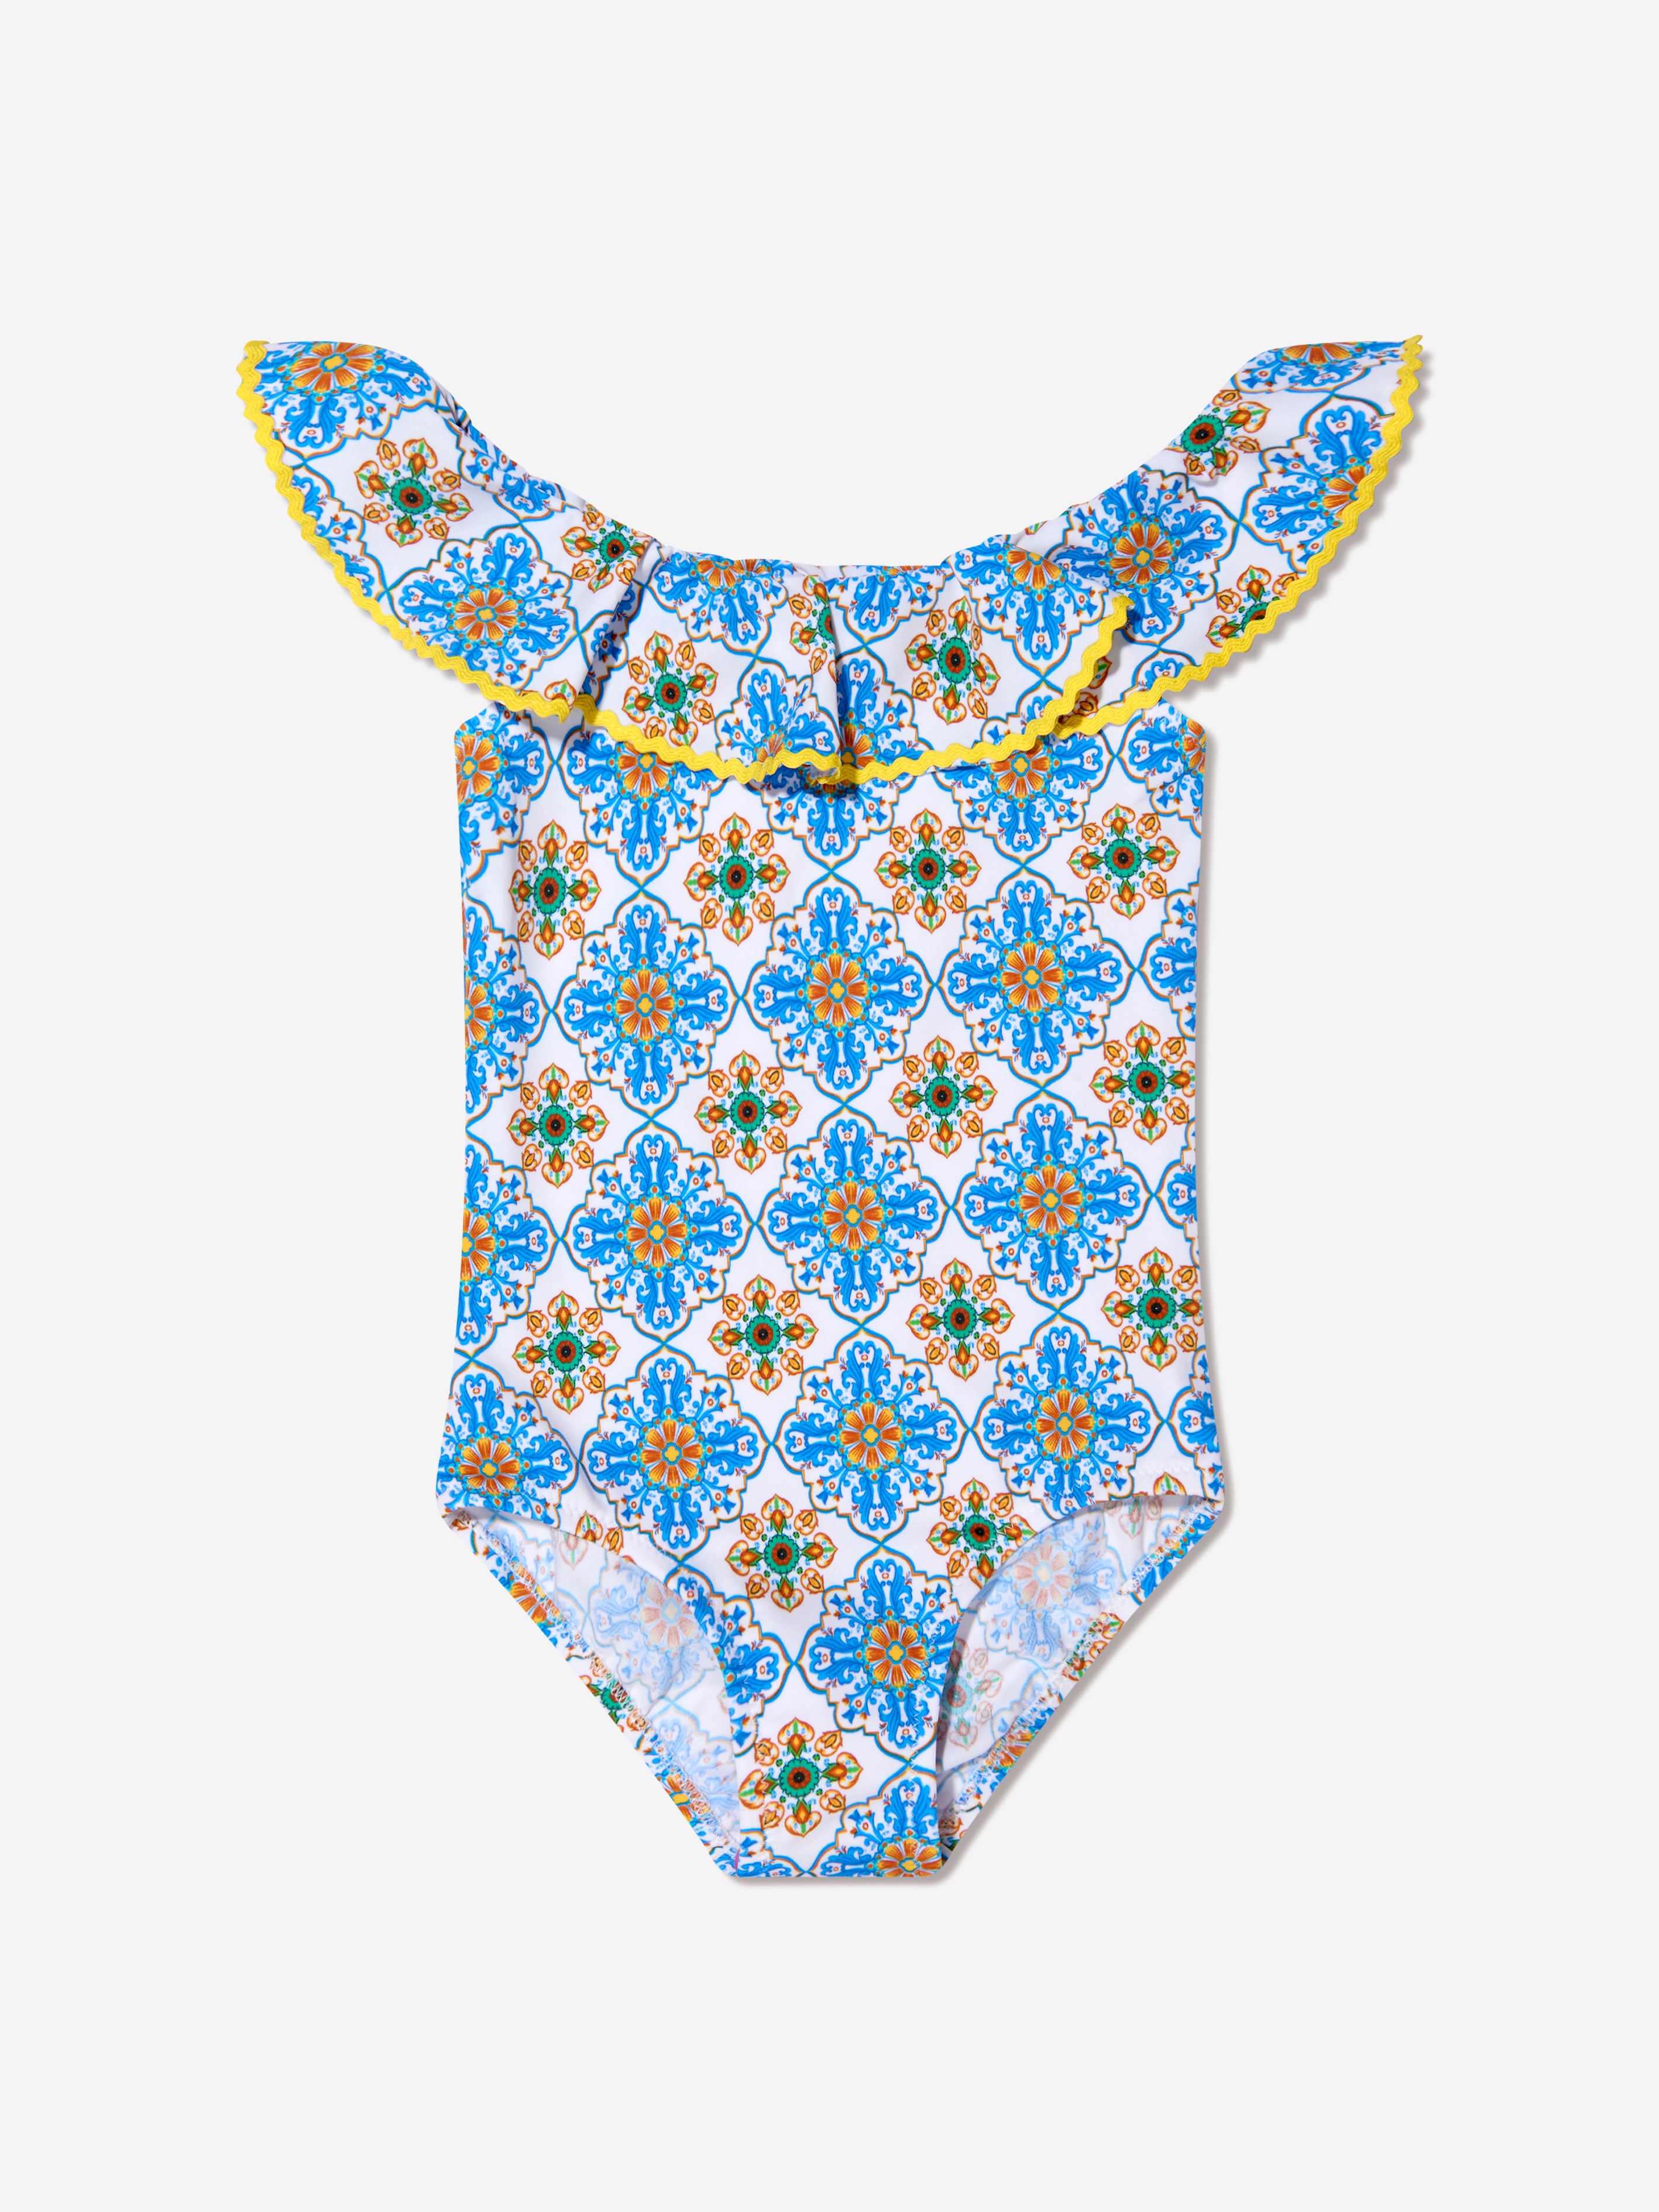 Nessi Byrd Dolly Bathing Suit